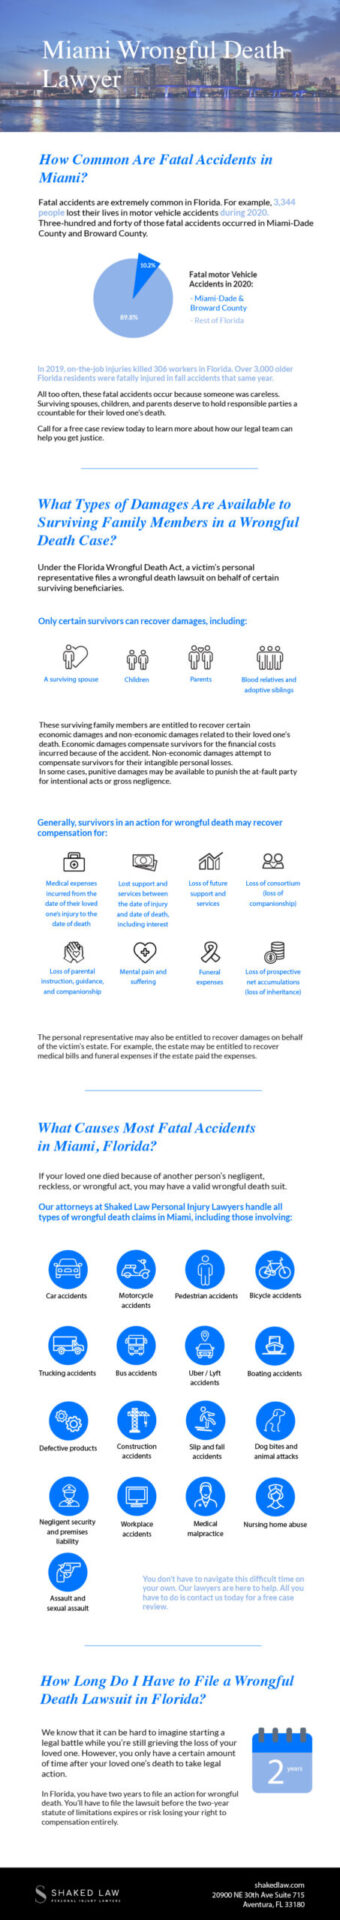 Miami Wrongful Death Infographic